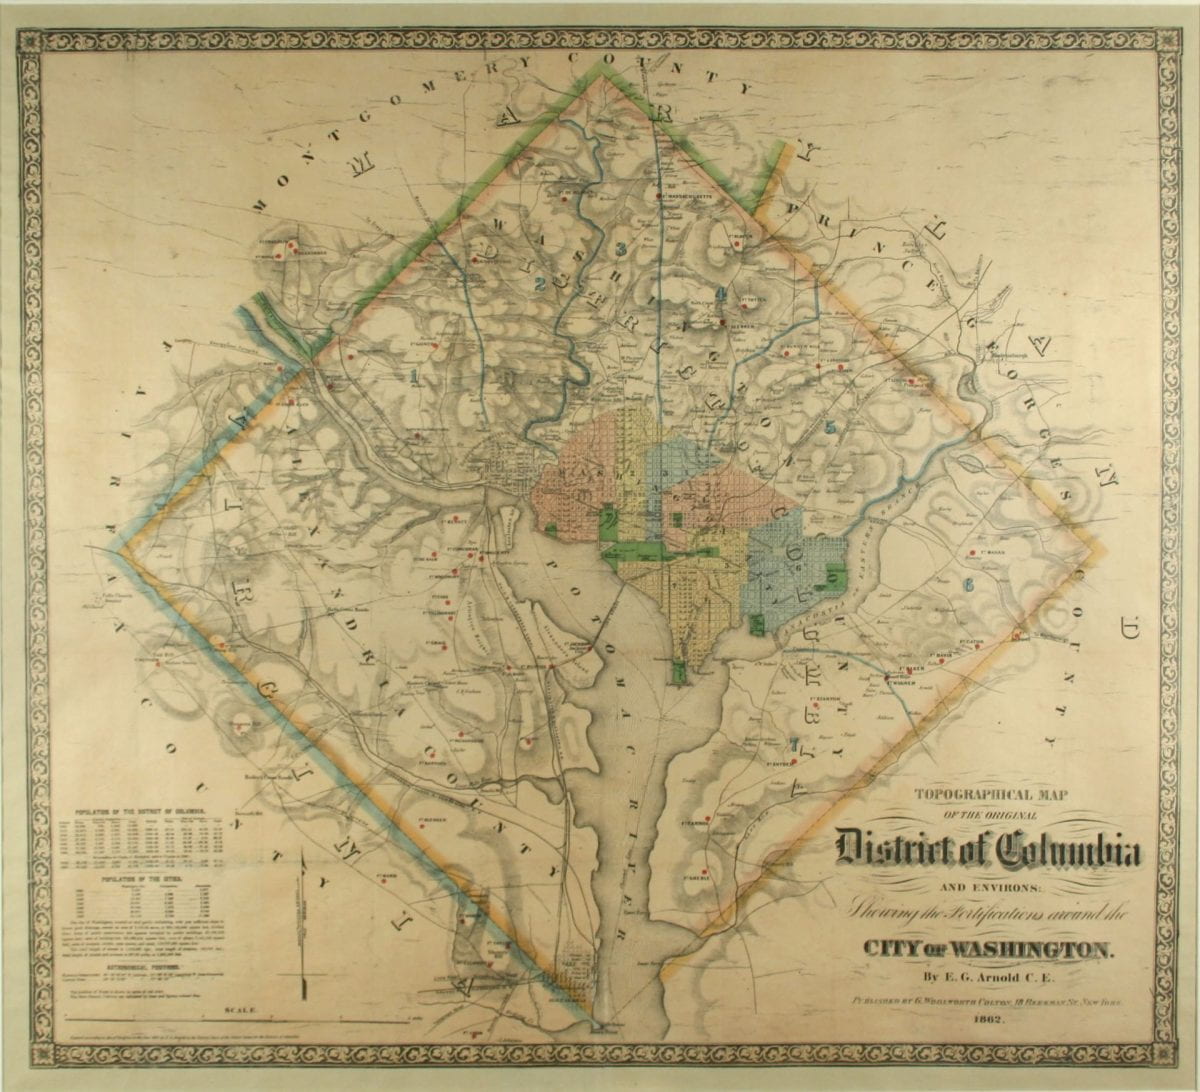 Detailed depictions of streets and railroads connected to DC. Colorful shapes in the center indicate school districts, red dots indicate fortifications.